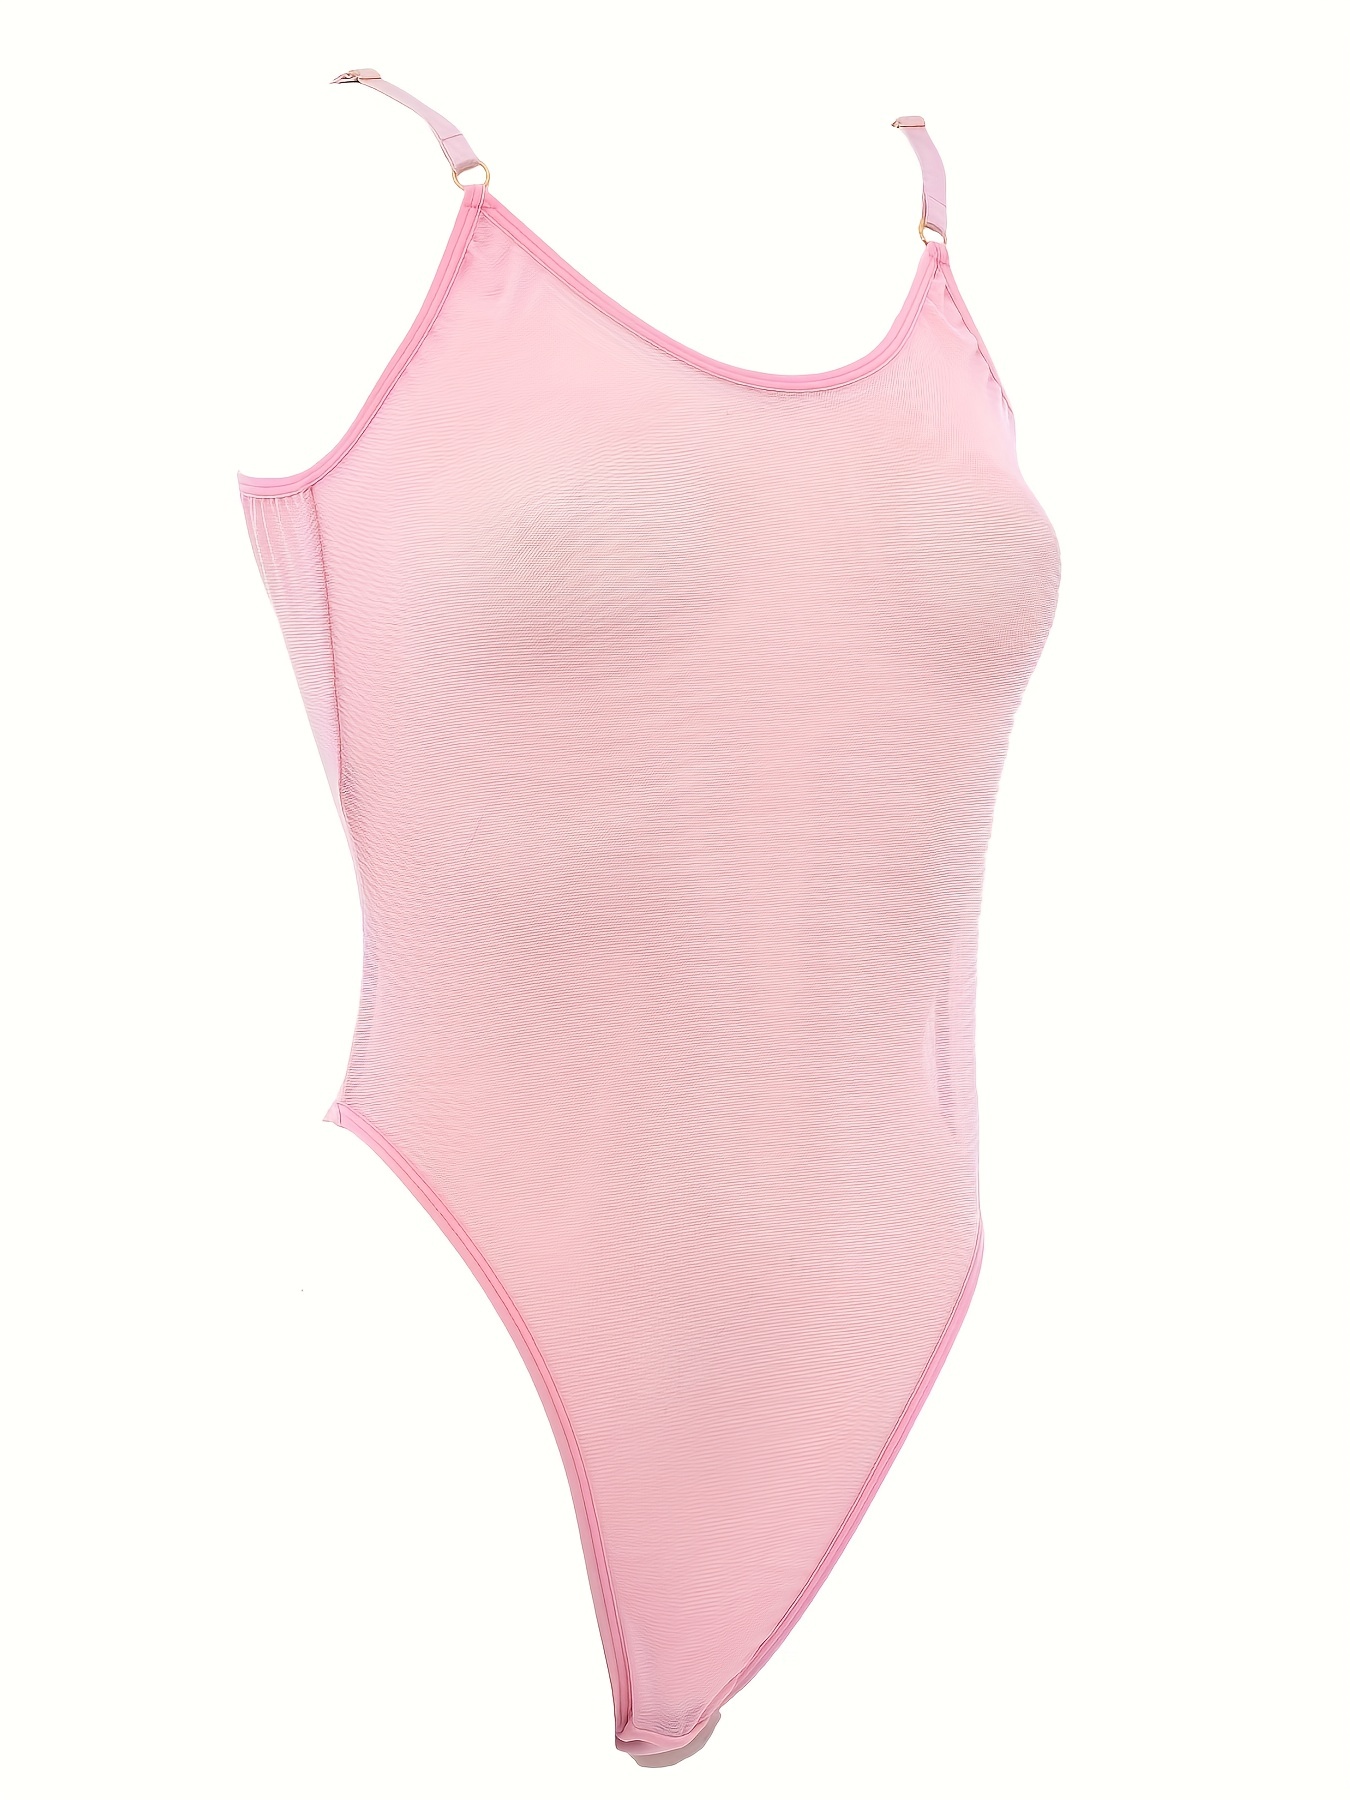 Women's XS Pink Thong Bodysuit with Mesh NWT Colsie